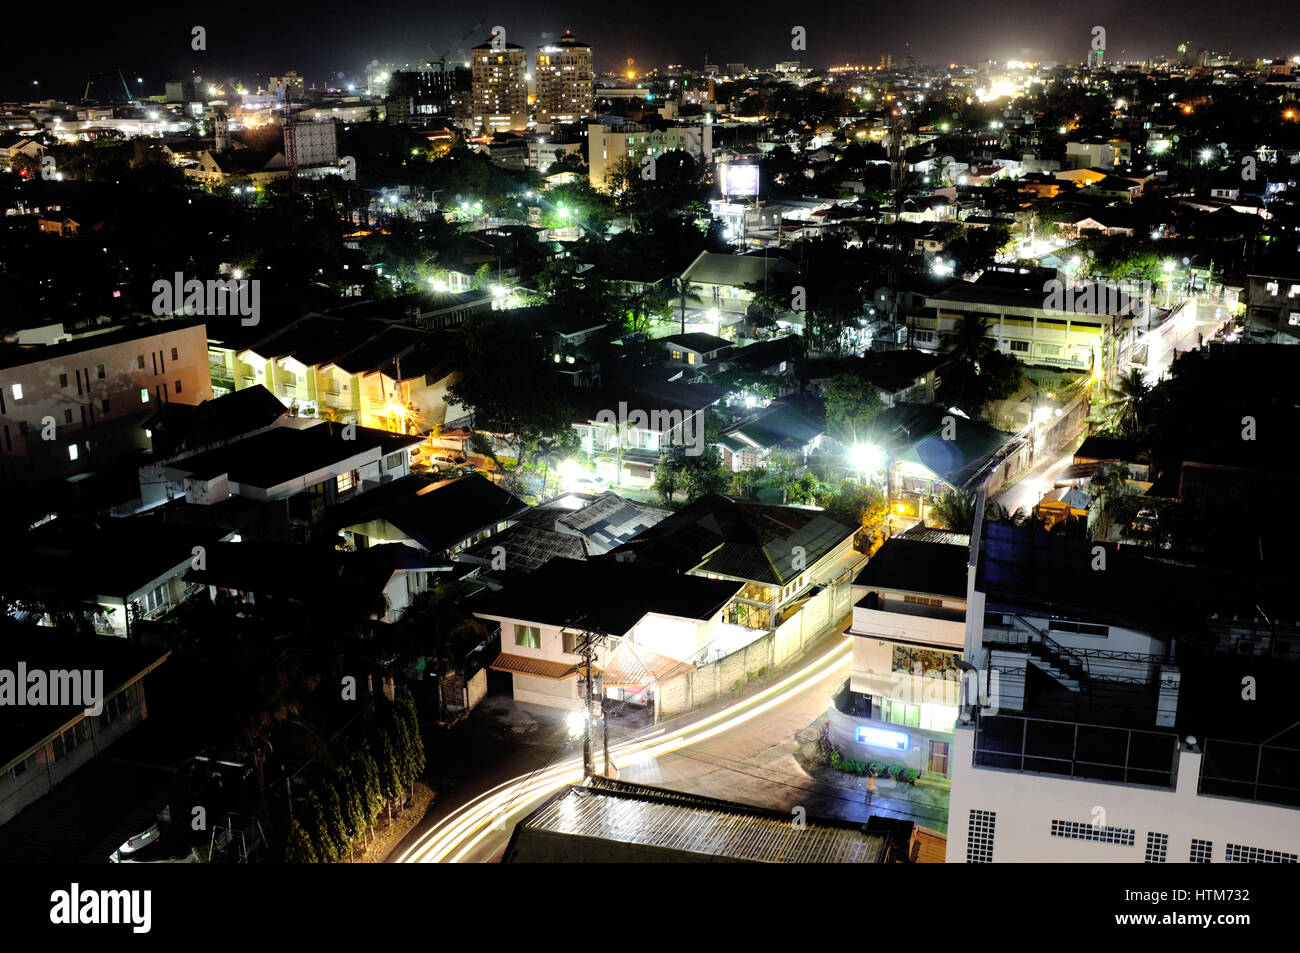 The skyline of Cebu City at night, the “second city” of the Philippines. It is one of the most popular destination in the Philippines with the busiest Stock Photo